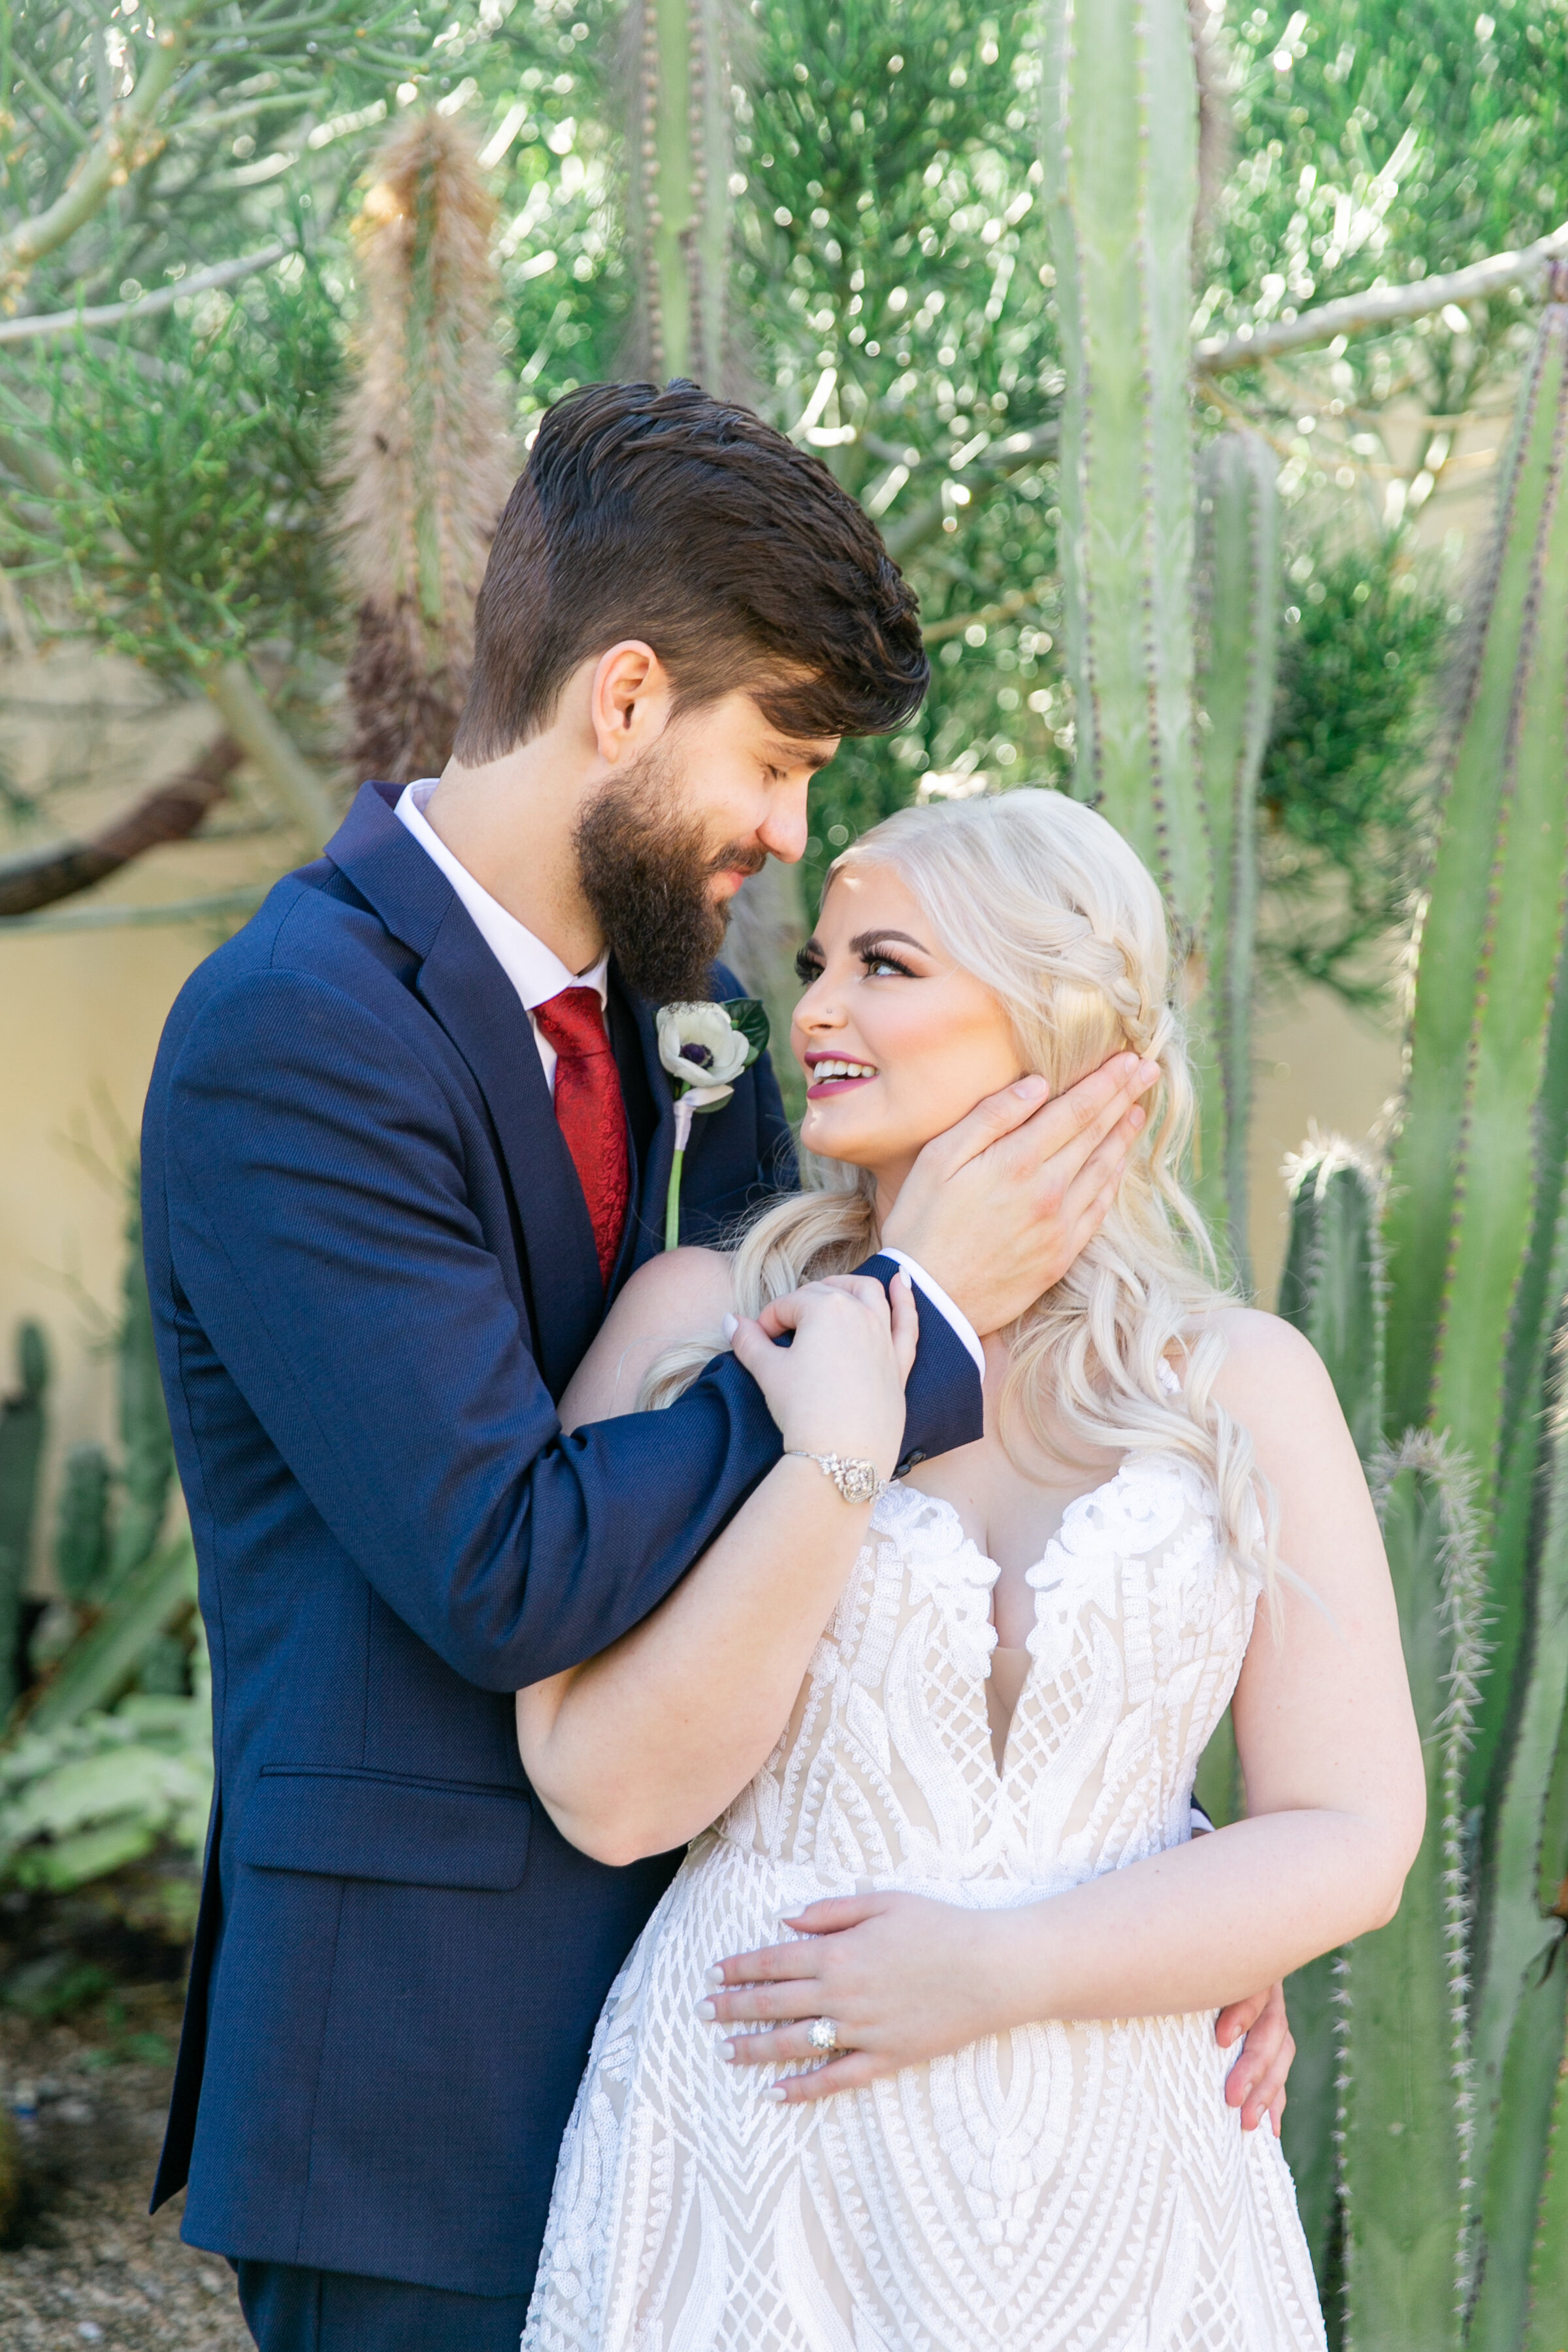 Karlie Colleen Photography - The Royal Palms Wedding - Some Like It Classic - Alex & Sam-164